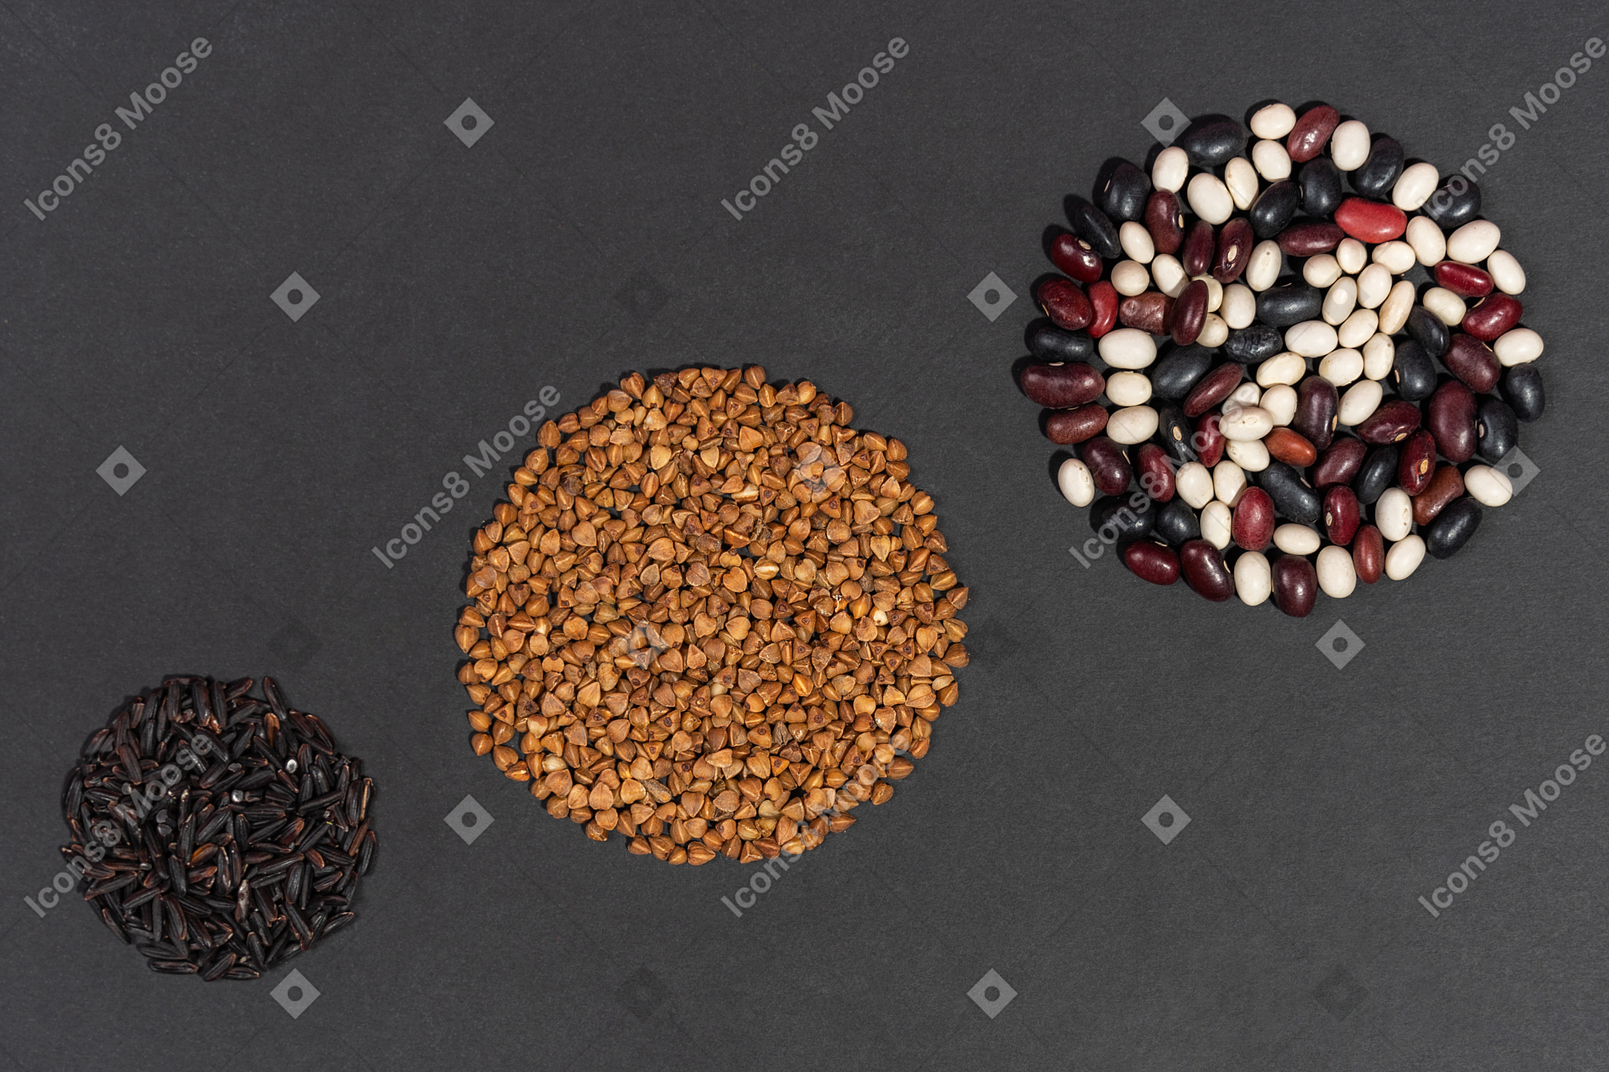 Three circles made of buckwheat black rice and multicolored beans